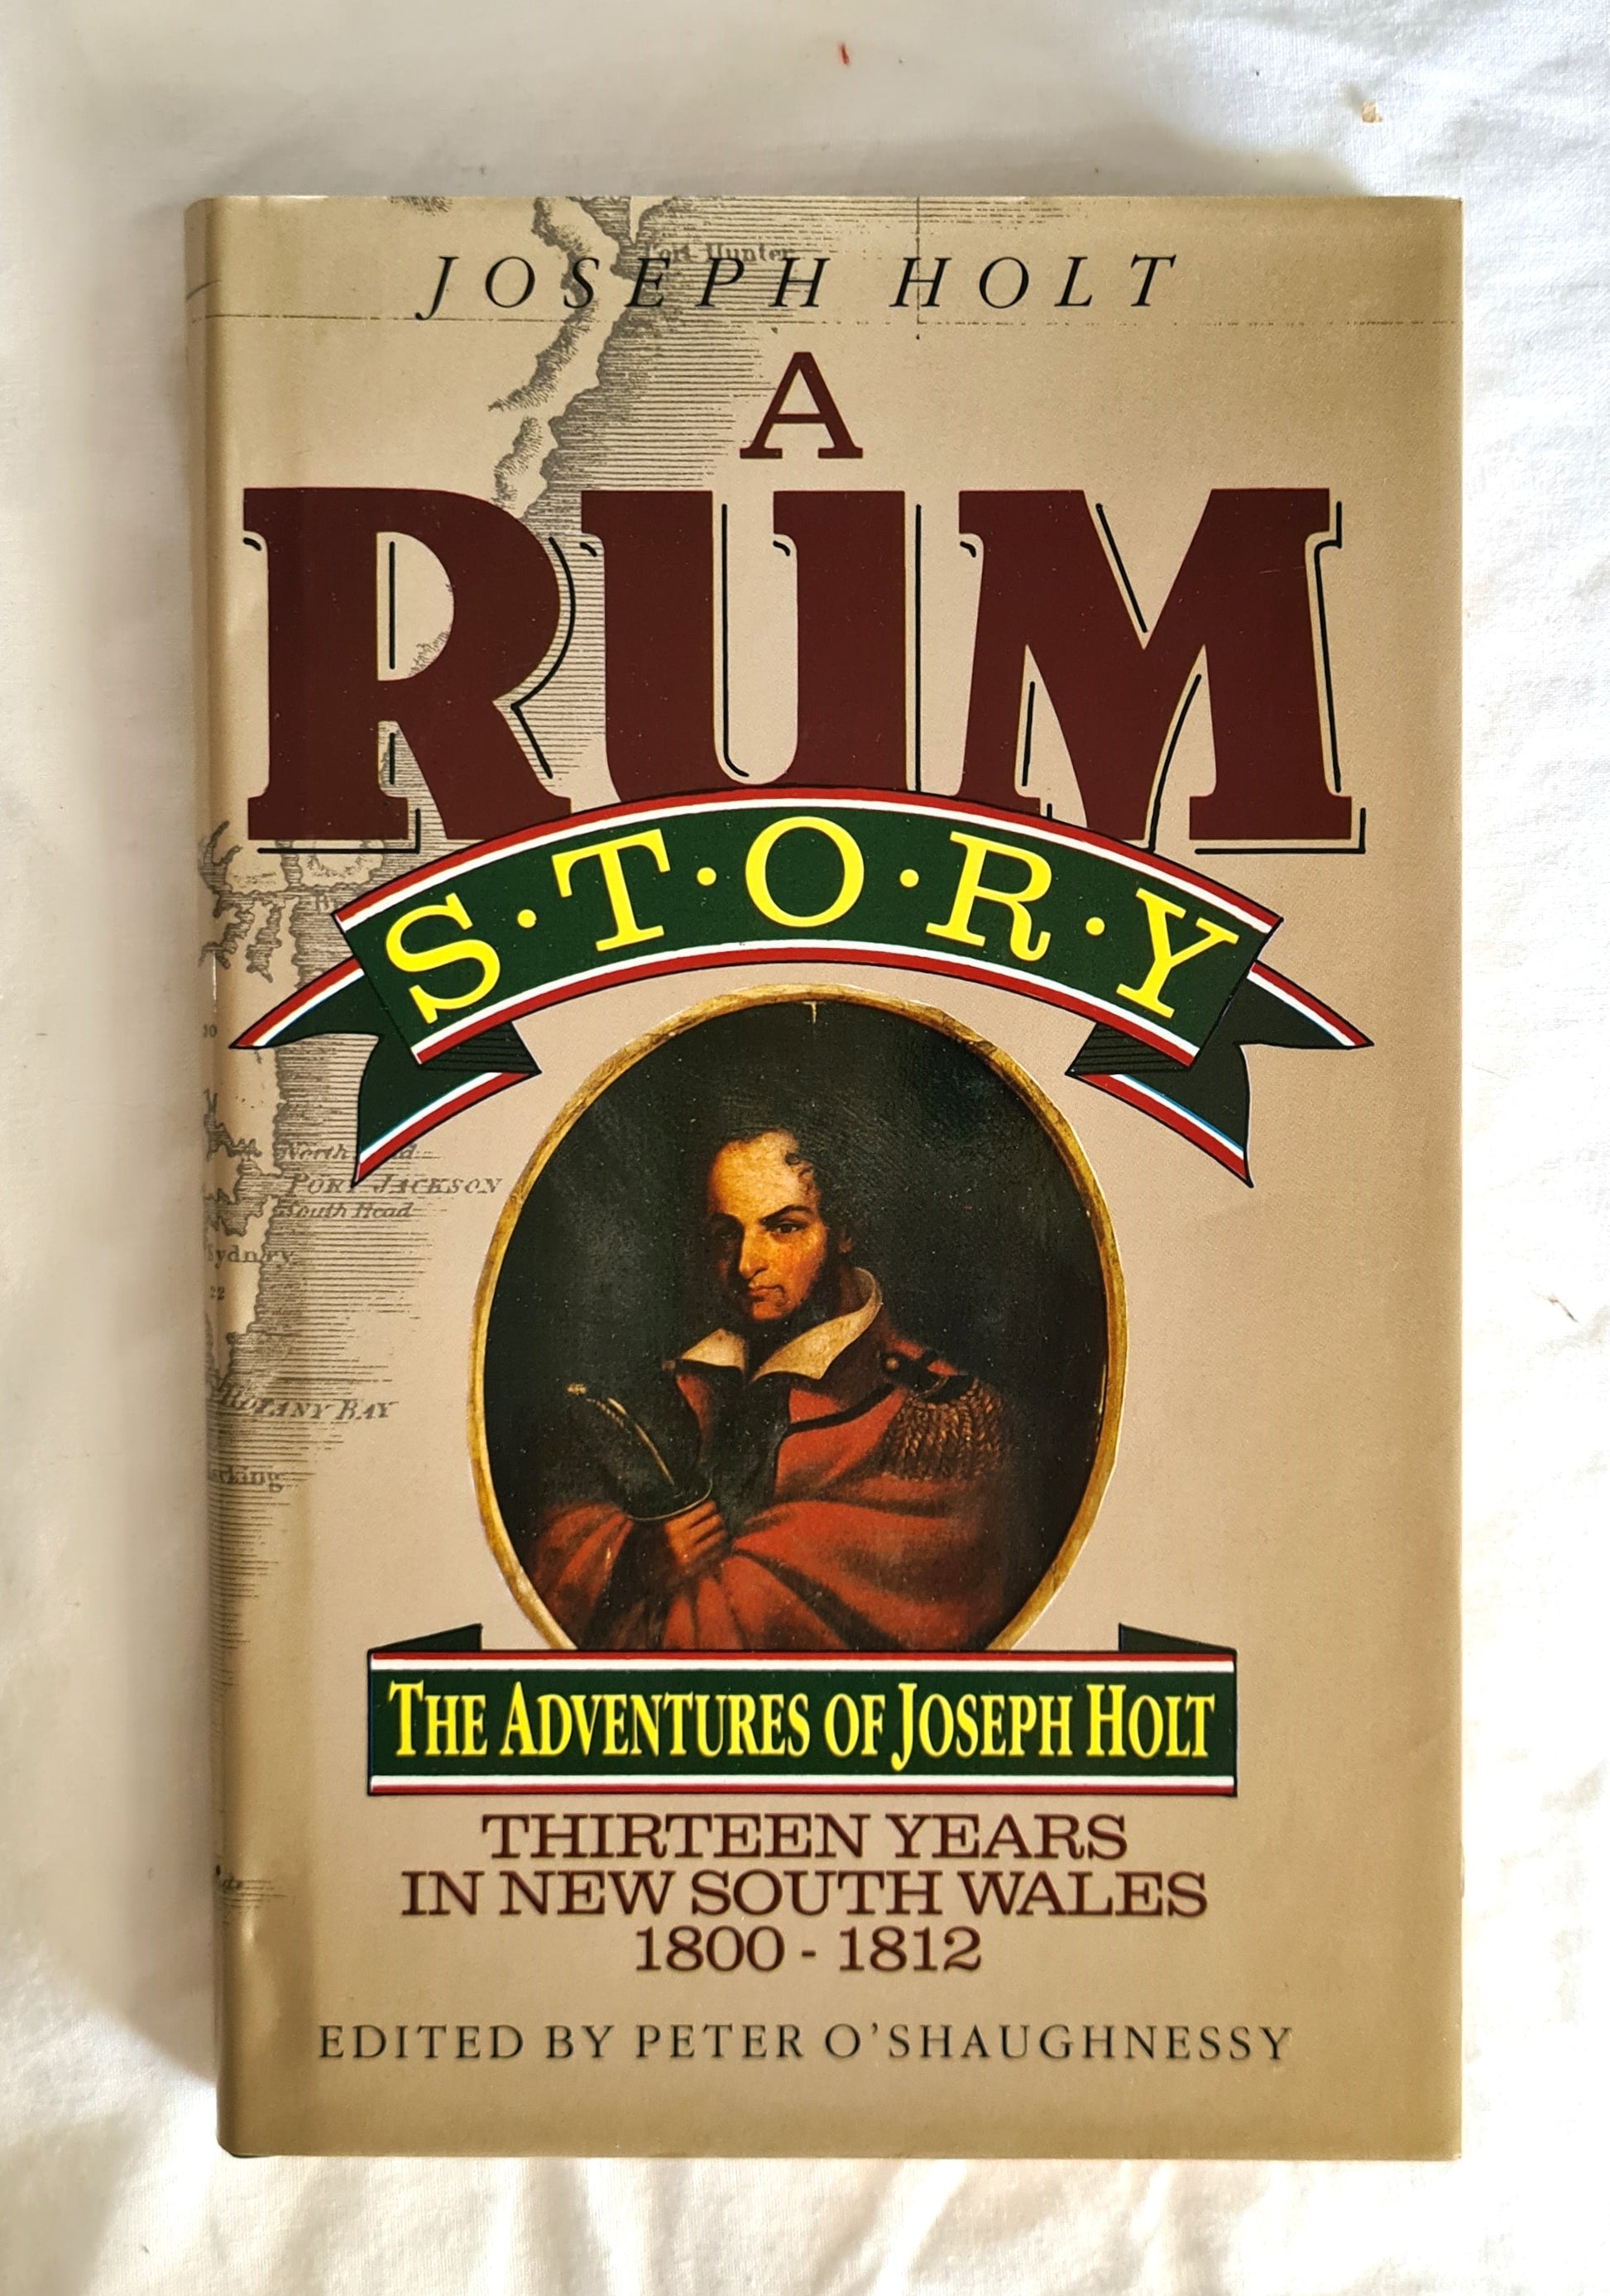 A Rum Story  The Adventures of Joseph Holt Thirteen Years in New South Wales (1800-12)  by Joseph Holt  Edited by Peter O’Shaughnessy